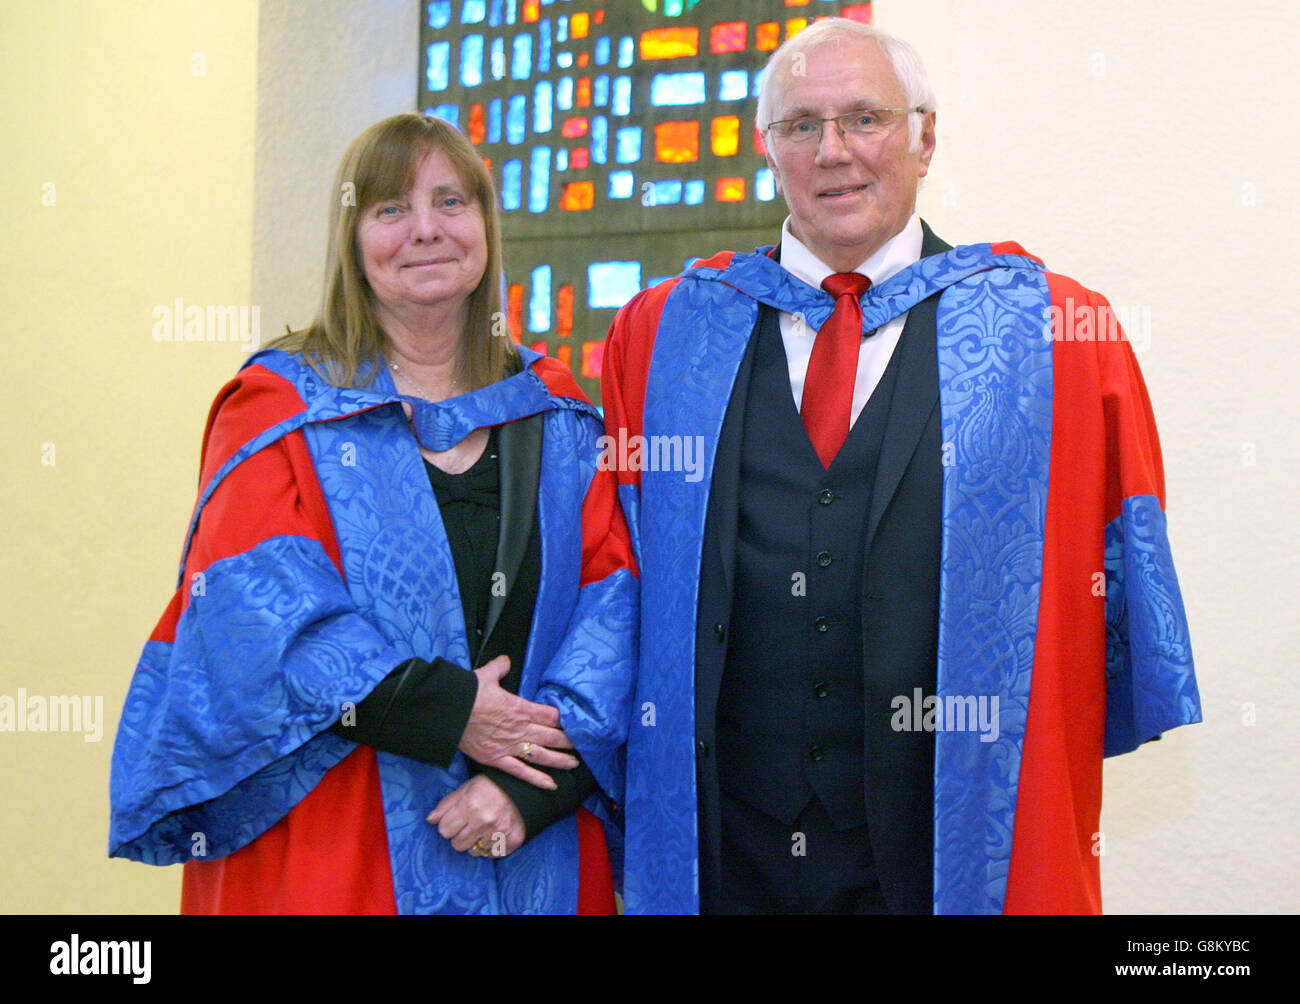 Hillsborough campaigners Margaret Aspinall and Trevor Hicks at Liverpool Hope University where she received an Honorary degree. Stock Photo